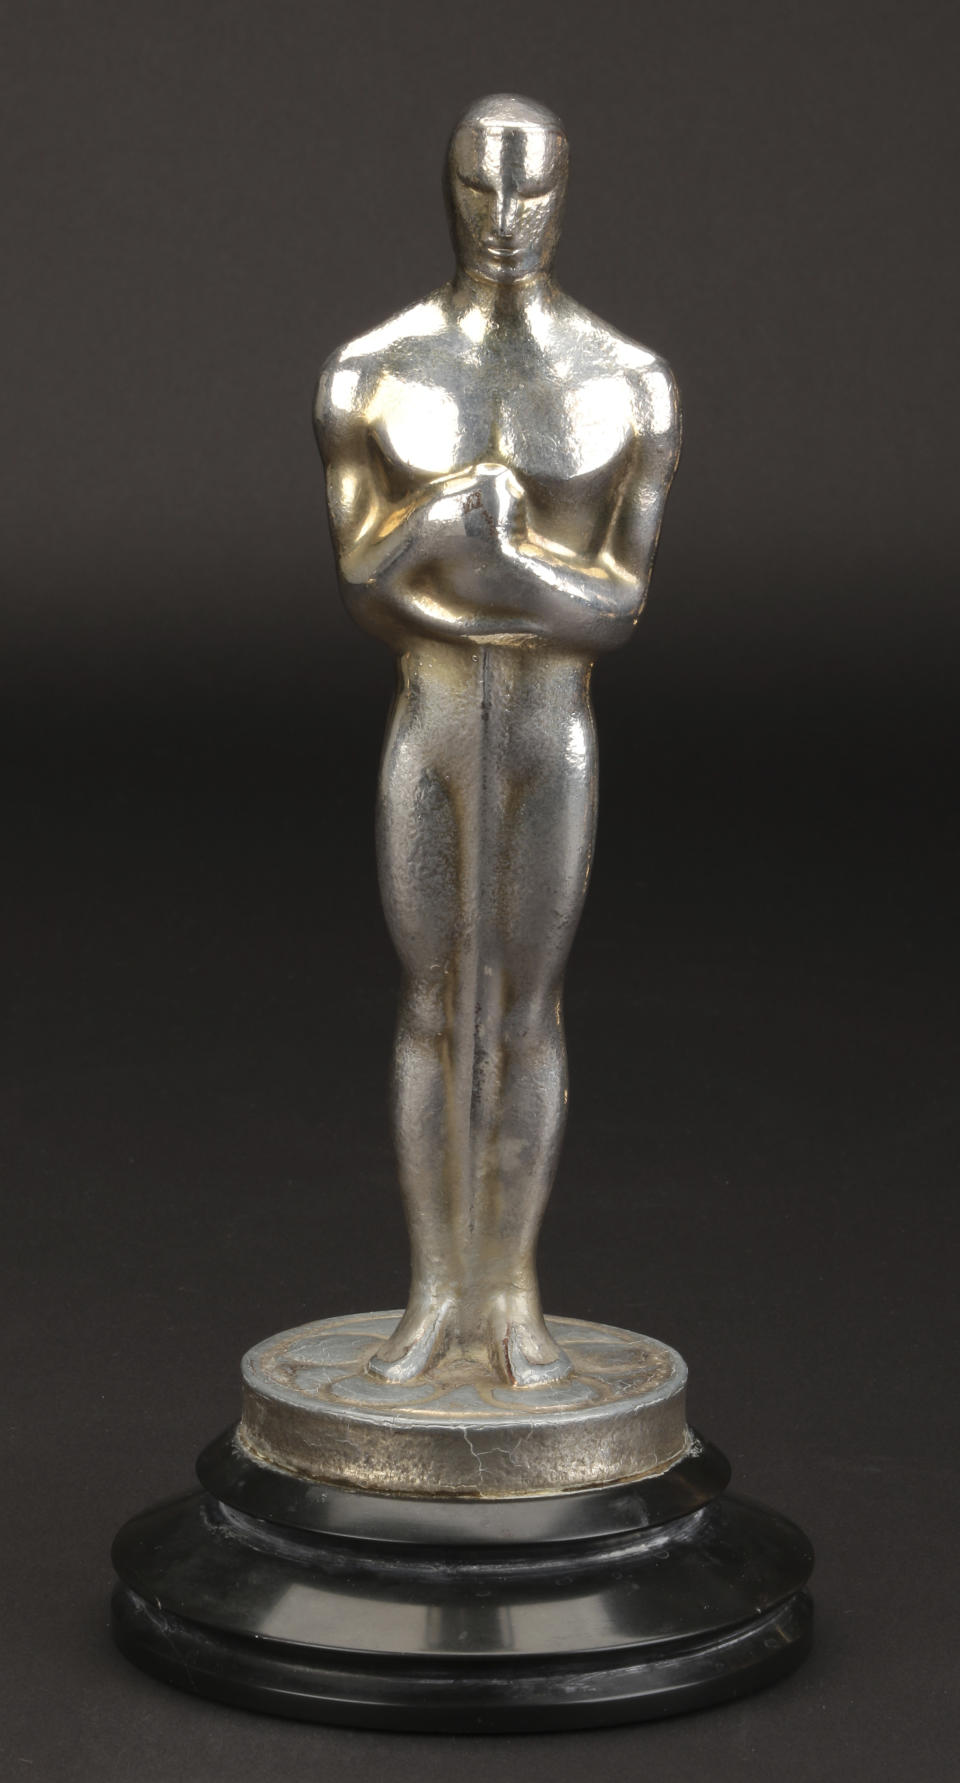 FILE - This undated file image provided by Profiles in History shows Irving Thalberg's Academy Award for best picture for "Mutiny on the Bounty." The best picture statuette for 1935's "Mutiny on the Bounty" fetched $240,000., in a rare auction of Oscars that ended Friday, Dec. 14, 2018, in Los Angeles. (Lou Bustamante/Profiles in History via AP, File)